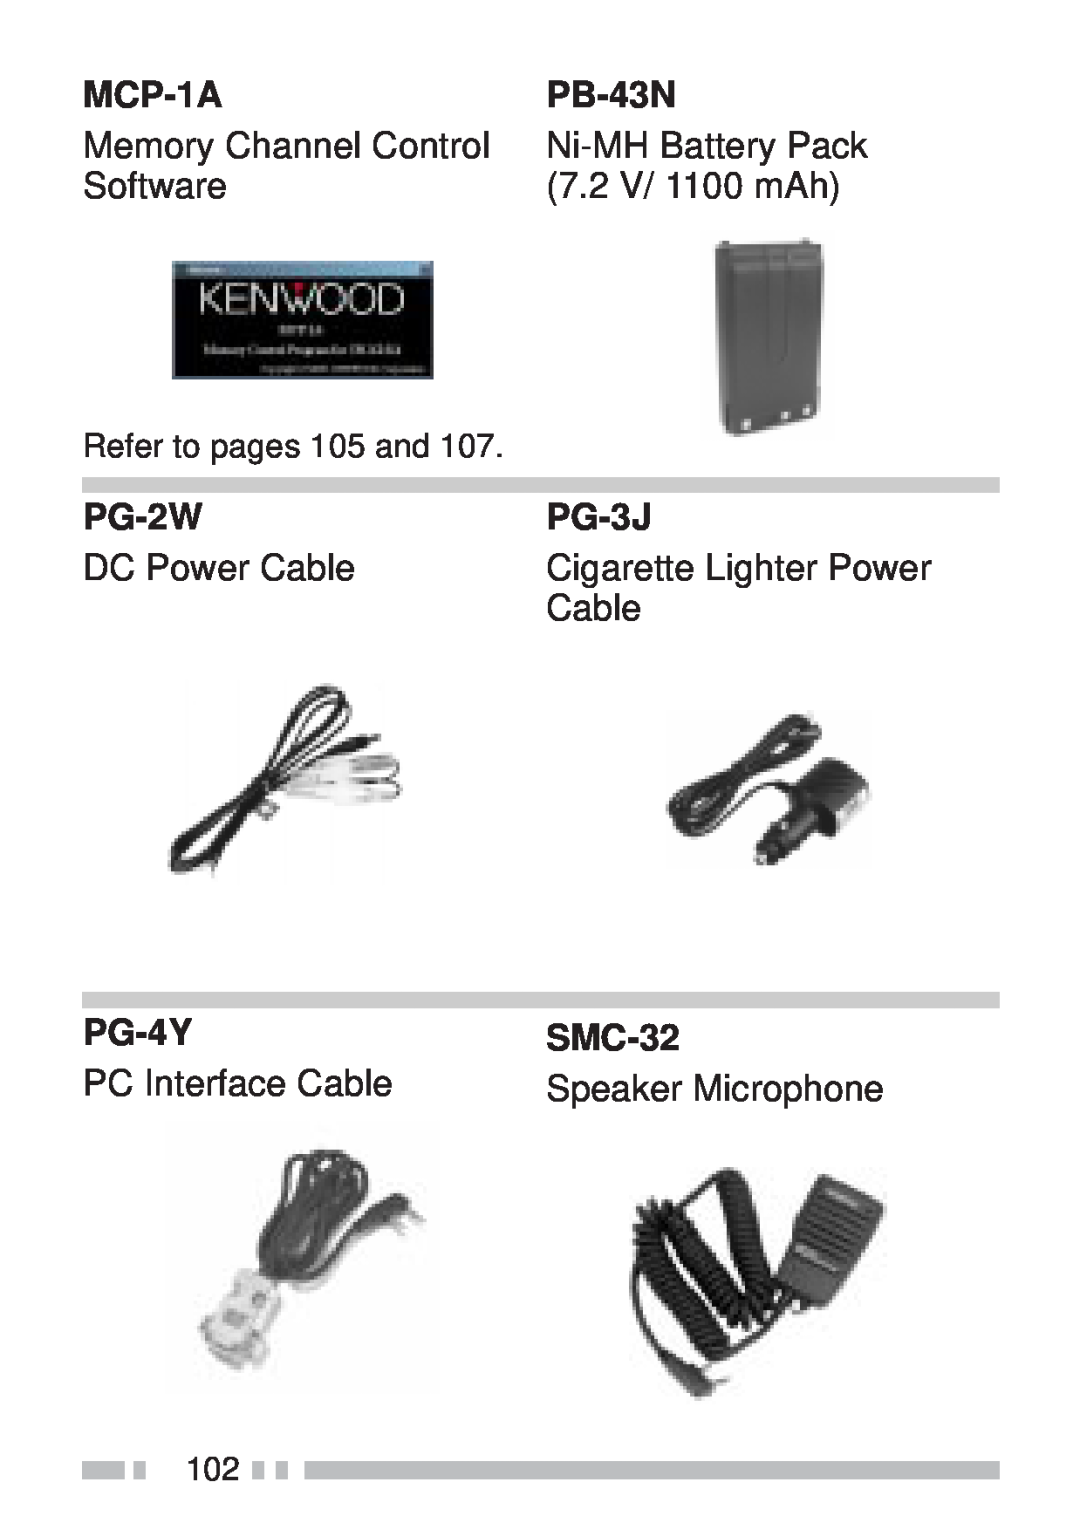 Kenwood TH-K4AT, TH-KAE, TH-K2ET MCP-1A, PB-43N, PG-2W, PG-3J, PG-4Y, SMC-32, PC Interface Cable, Speaker Microphone 